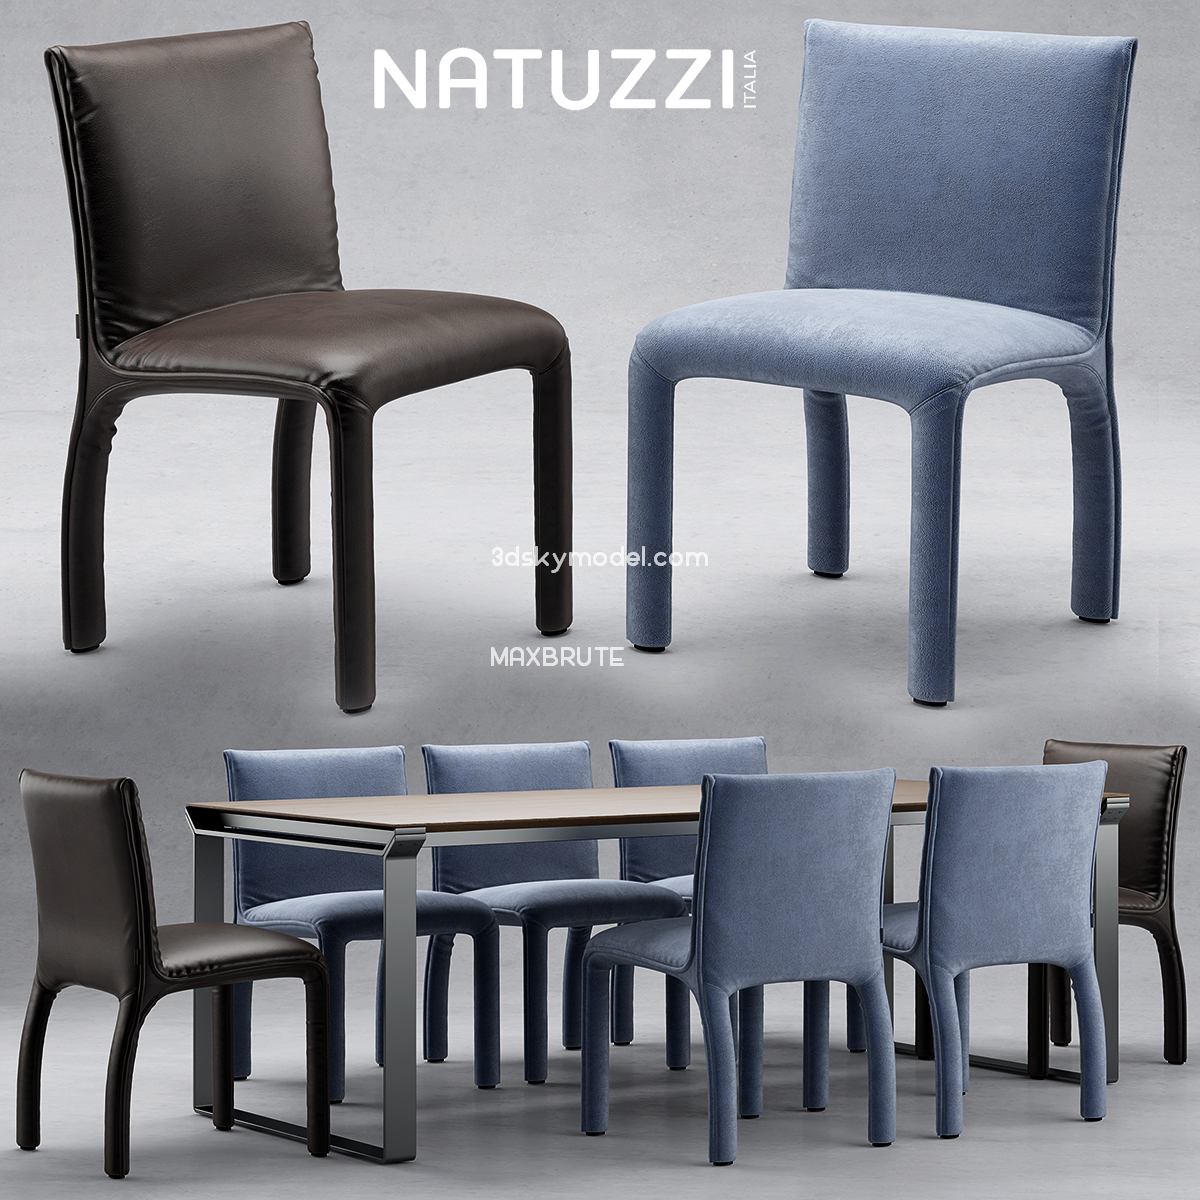 3dSkyHost: Natuzzi HEDI chair and table 3dmodel 3dsmax